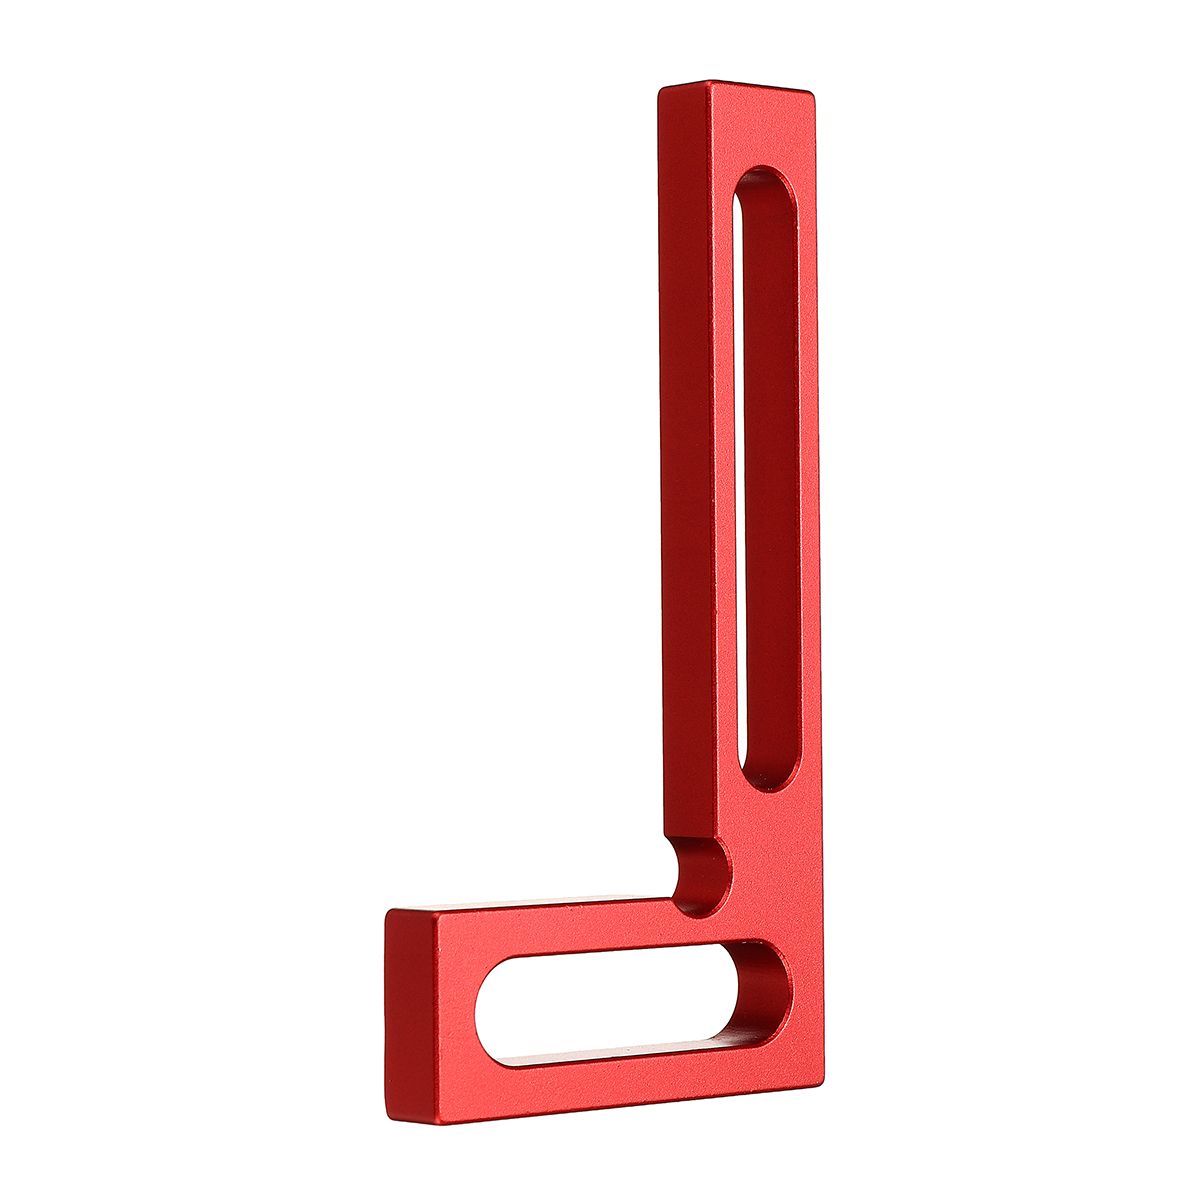 90-Degree-Positioning-Squares-Right-Angle-Clamps-Woodworking-Carpenter-Tool-Corner-Clamping-Square-1361280